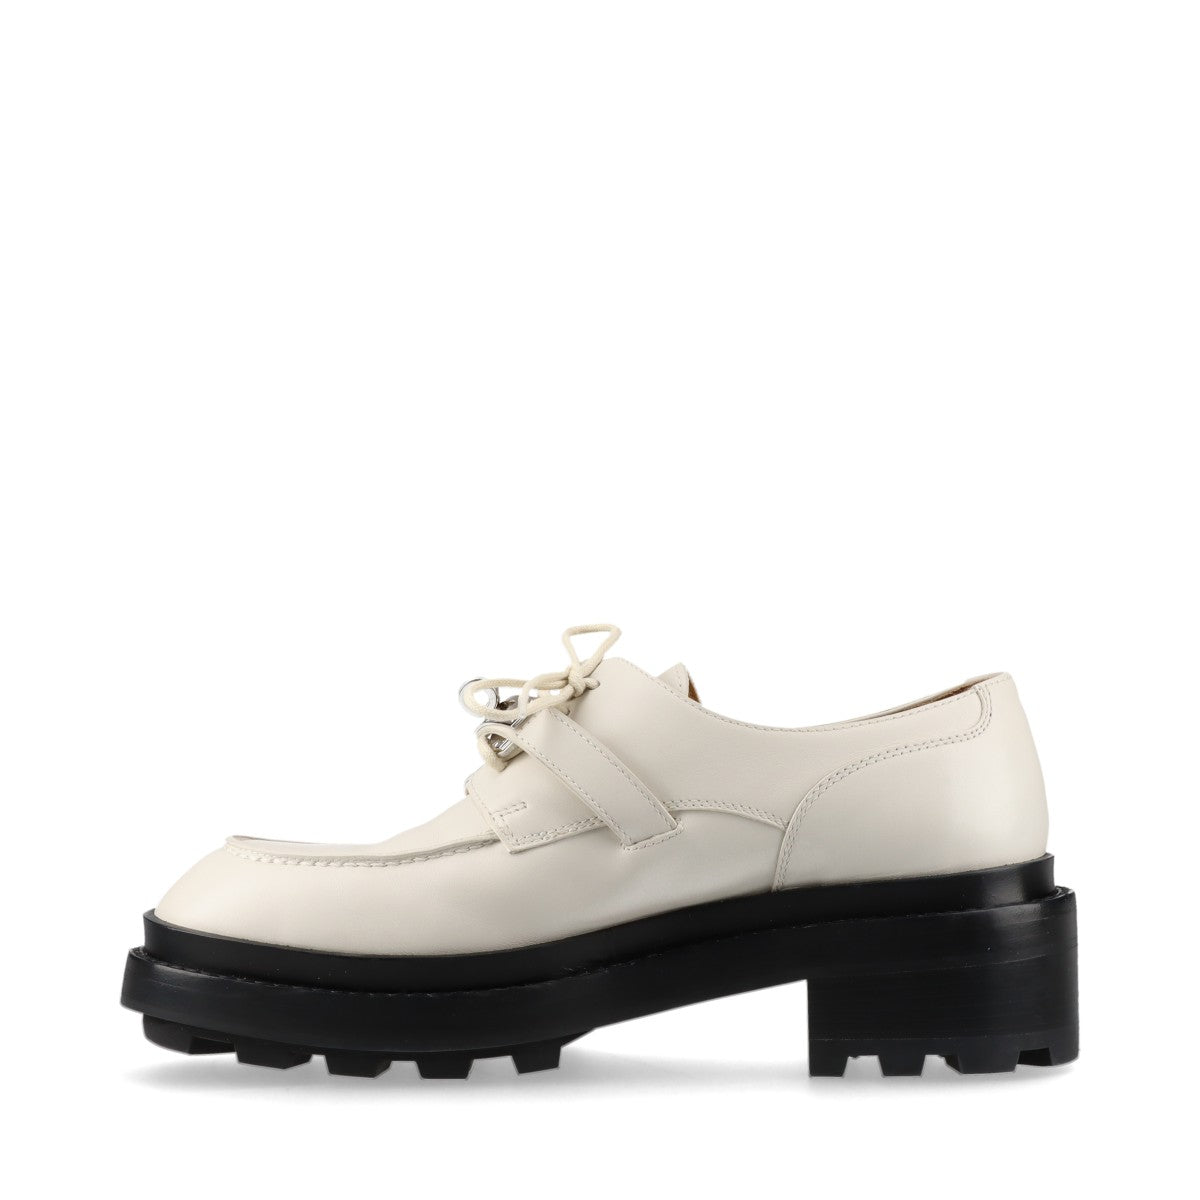 Hermès Fast Leather Leather shoes EU37 Ladies' Ivory Kelly Metal Fittings